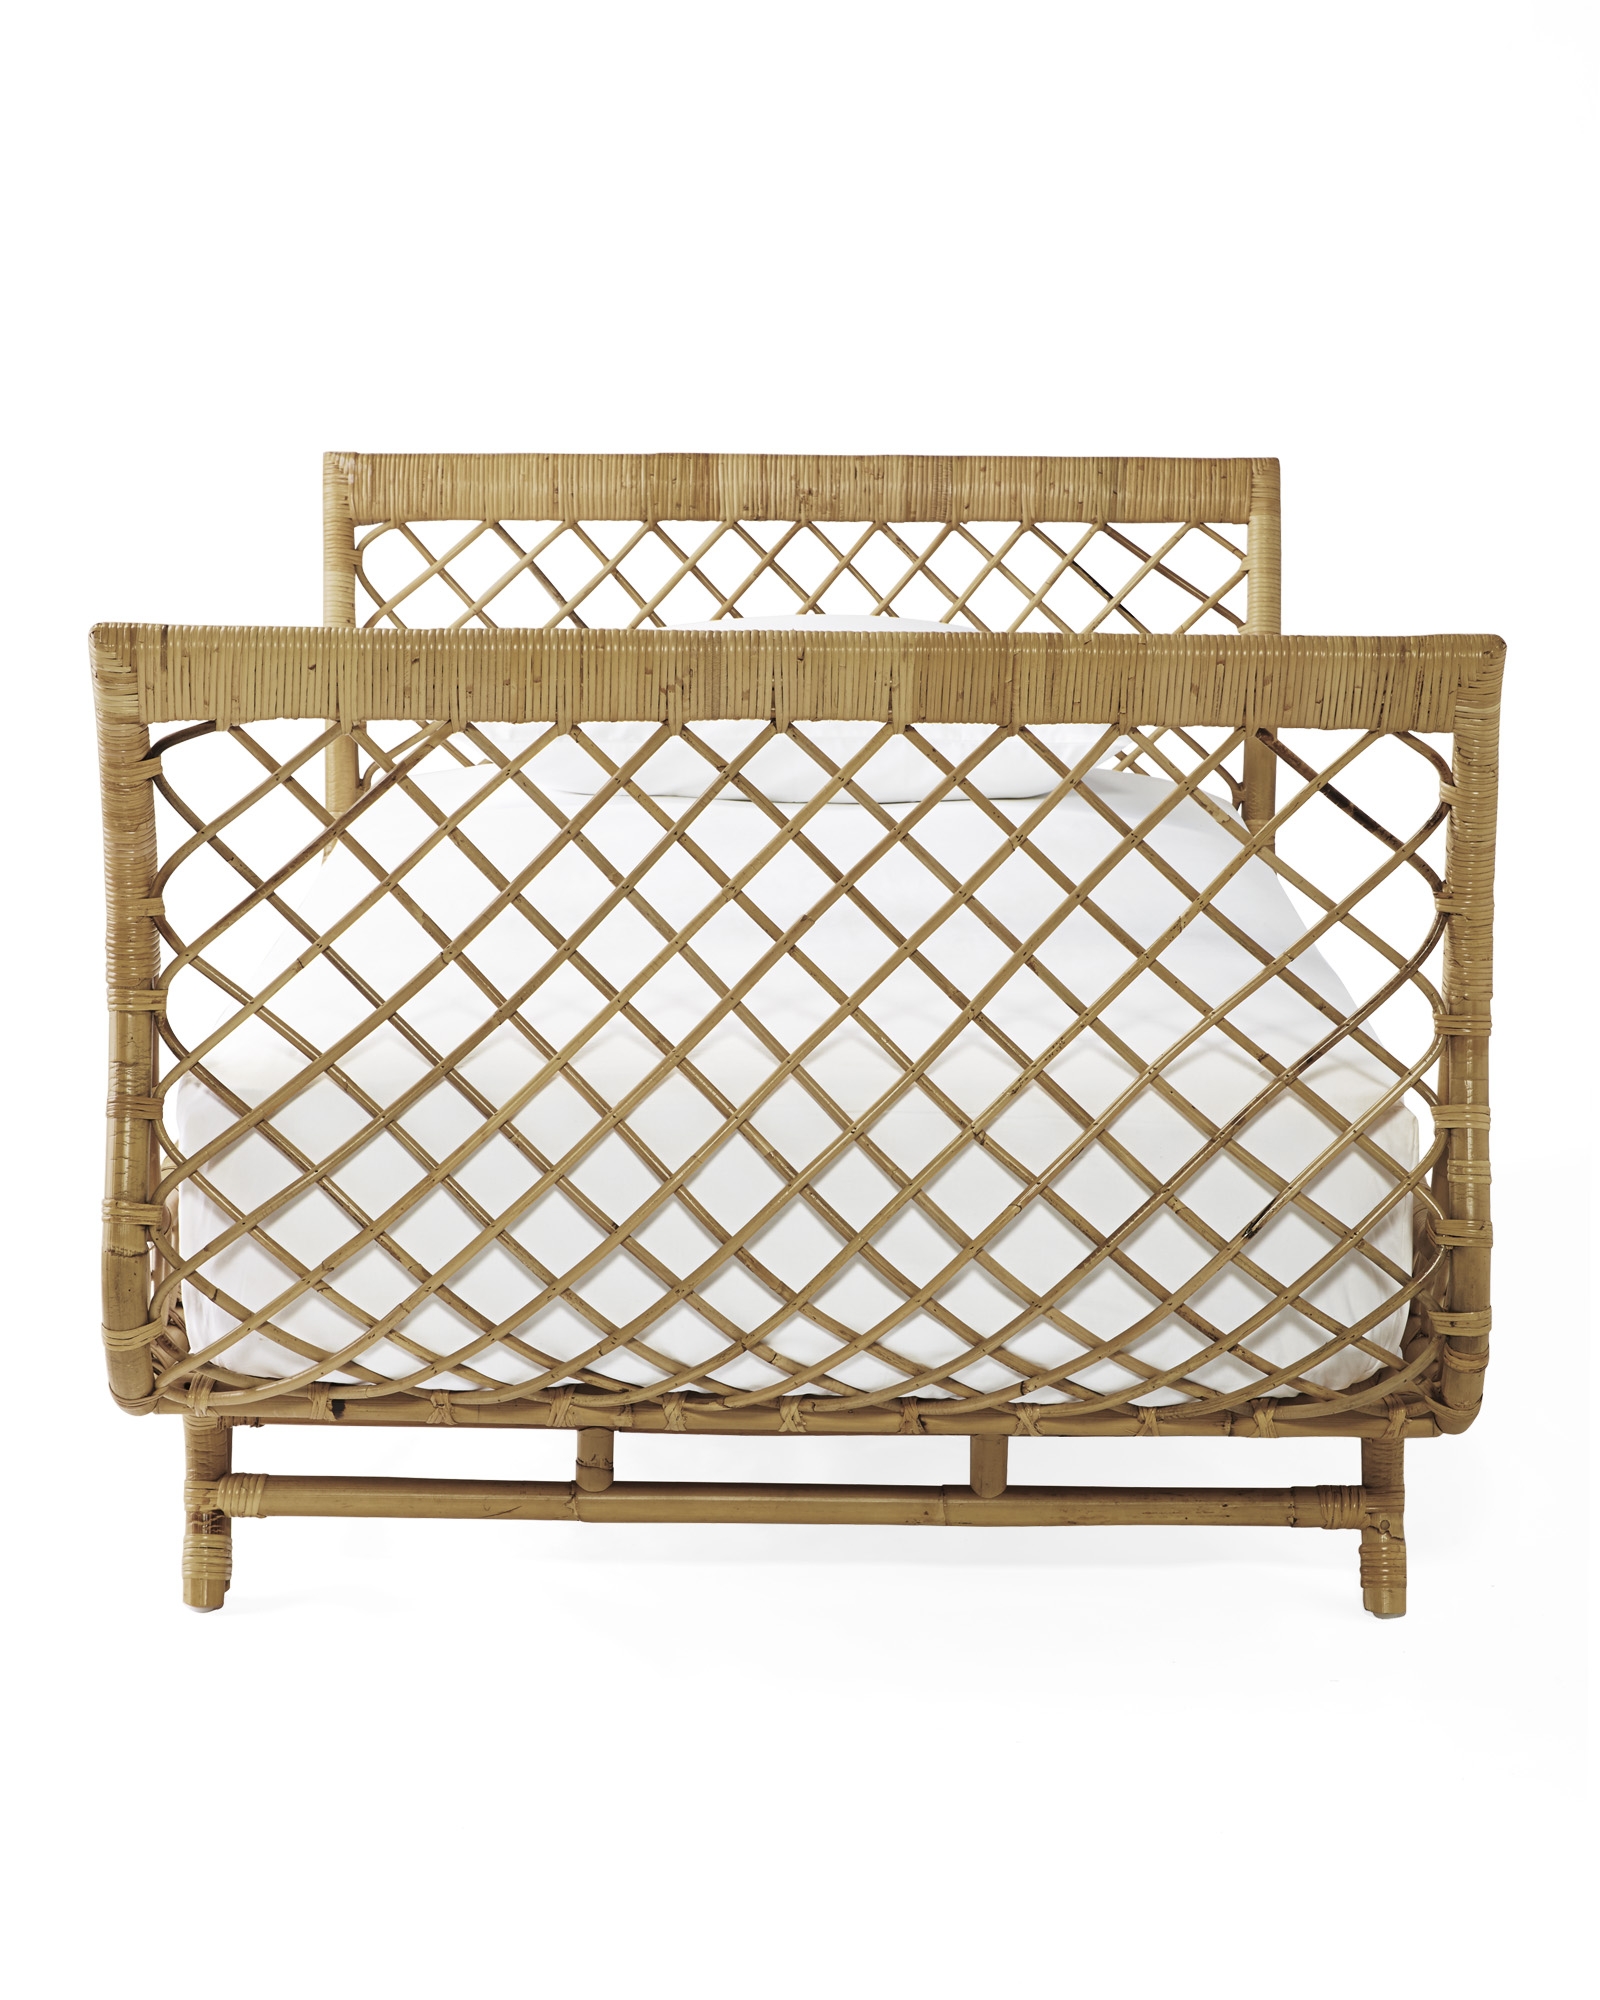 Avalon Daybed - Image 5